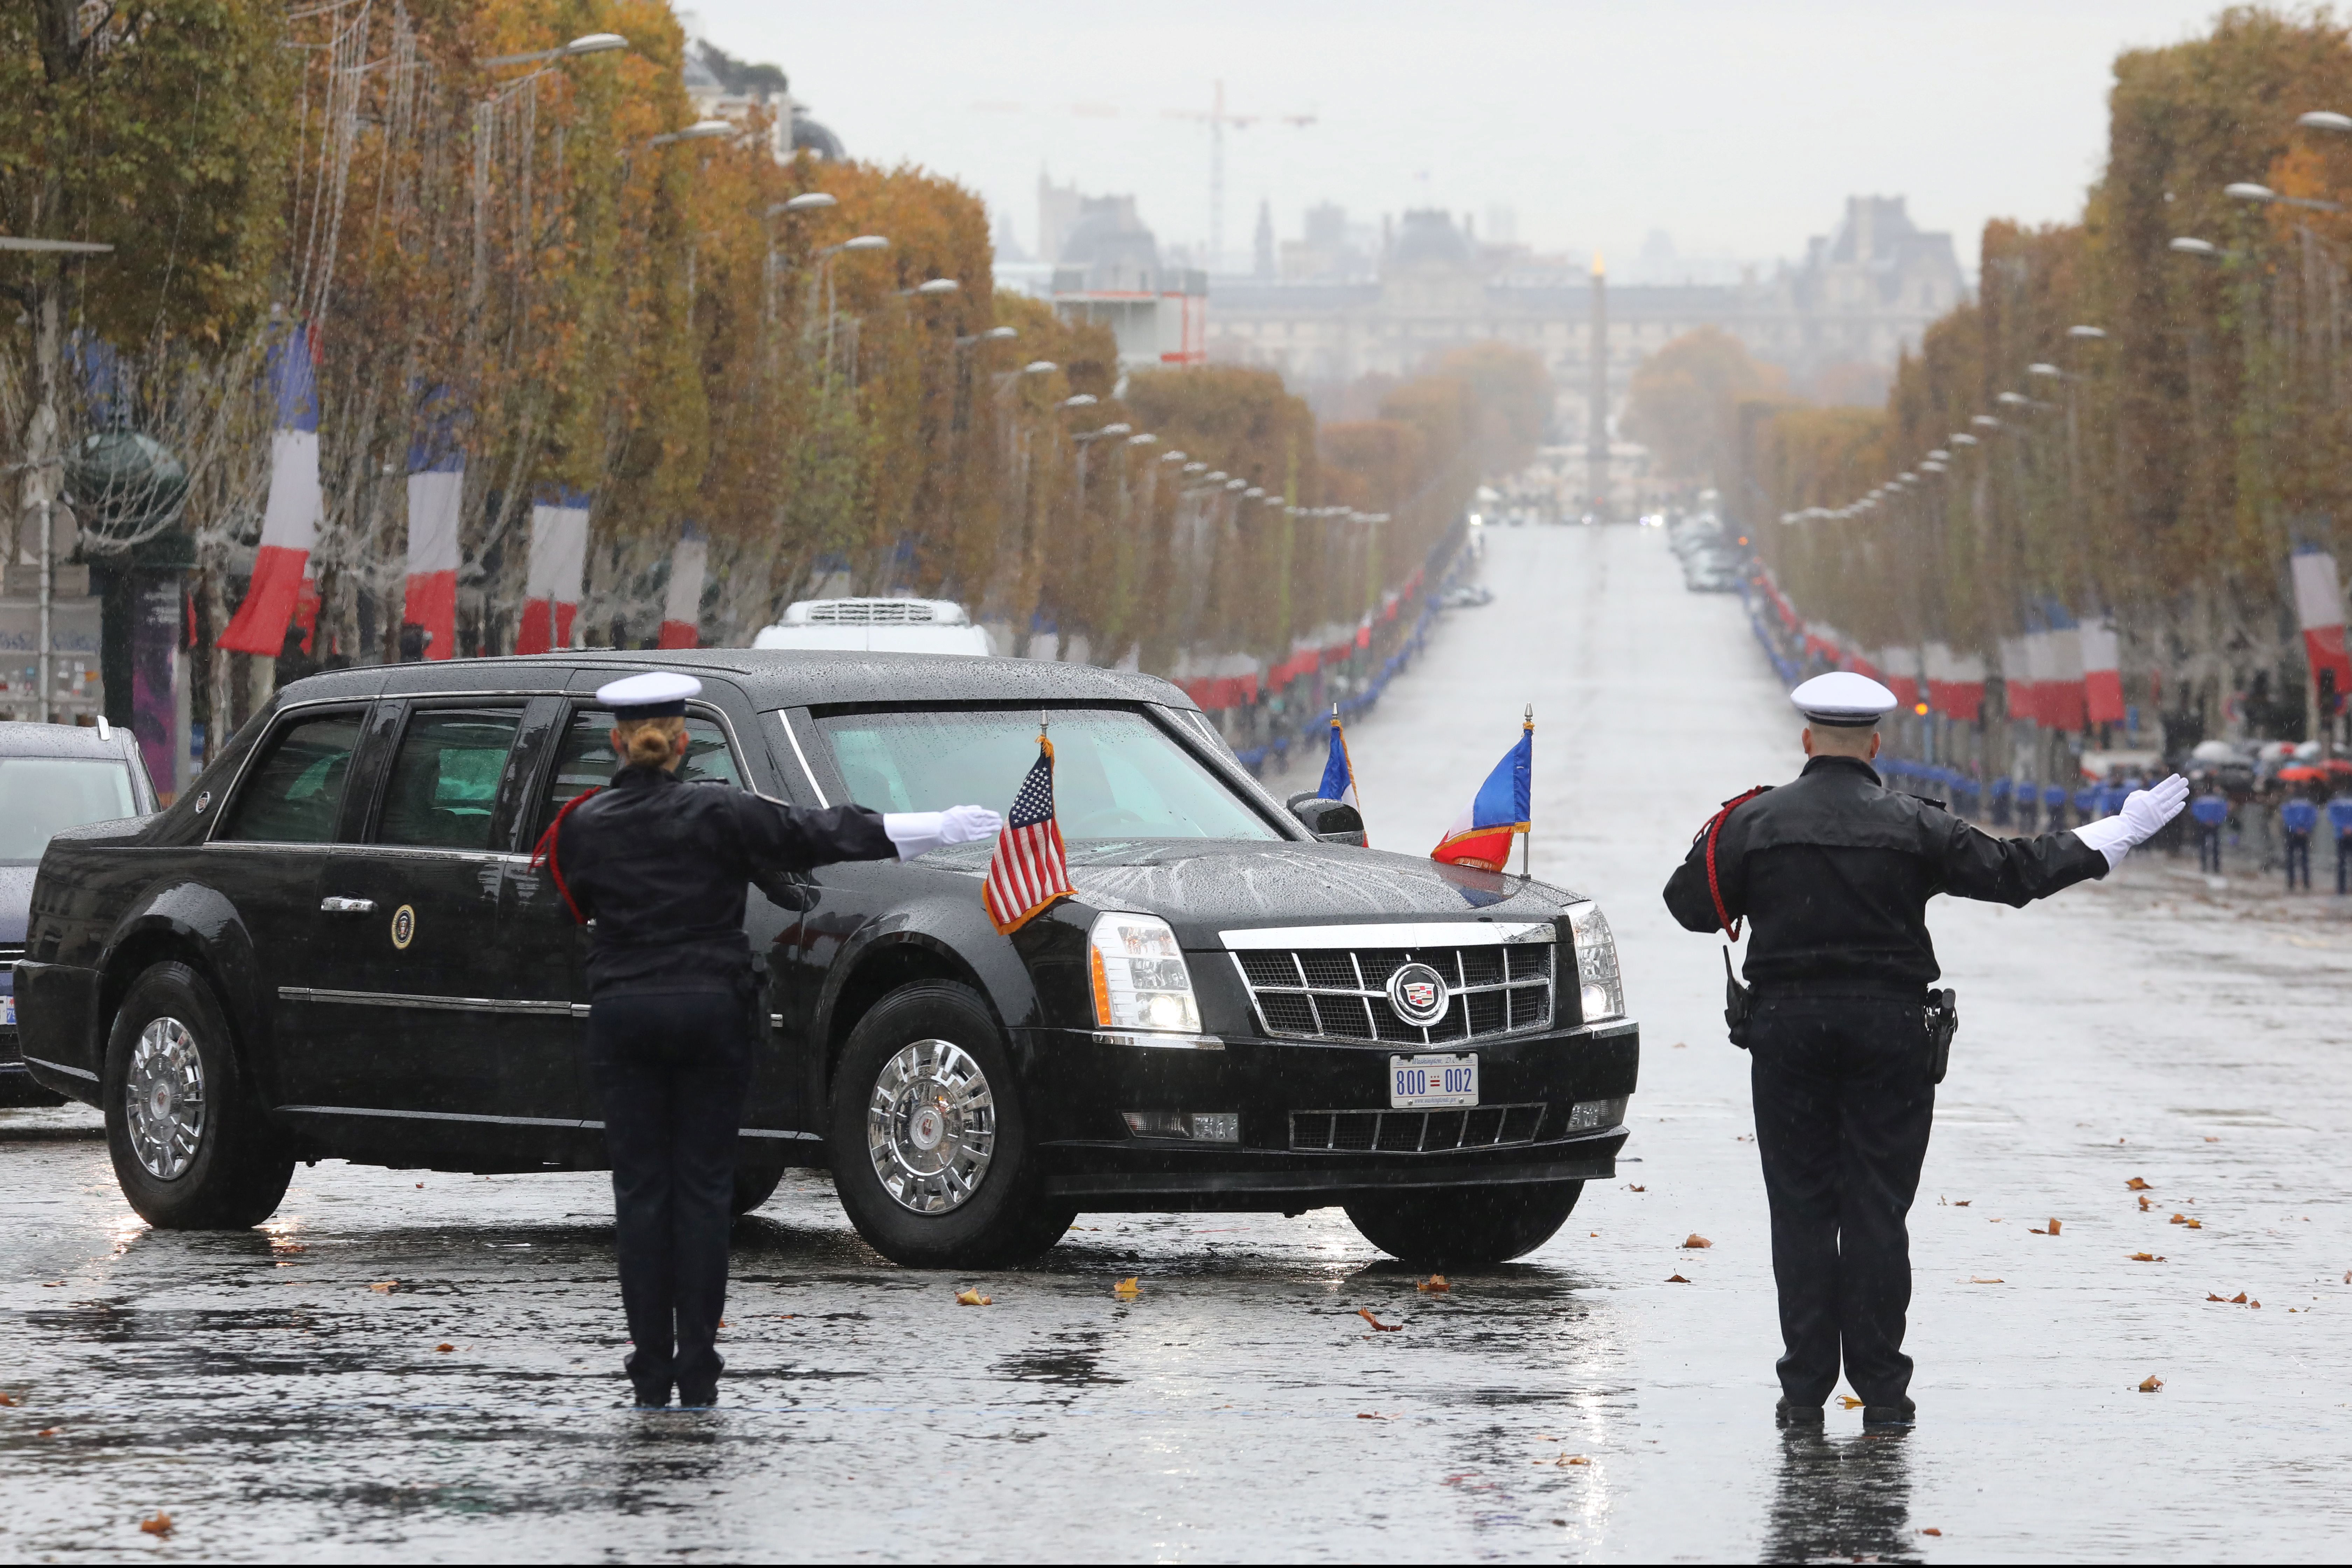 epa07157471 The armored limousine known as 'The Beast' carrying US President Donald J. Trump arrives ahead of the international ceremony for the Centenary of the WWI Armistice of 11 November 1918 at the Arc de Triomphe, in Paris, France, 11 November 2018. Heads of State and Government commemorate the memory of their fallen soldiers in France.  EPA/LUDOVIC MARIN / POOL MAXPPP OUT